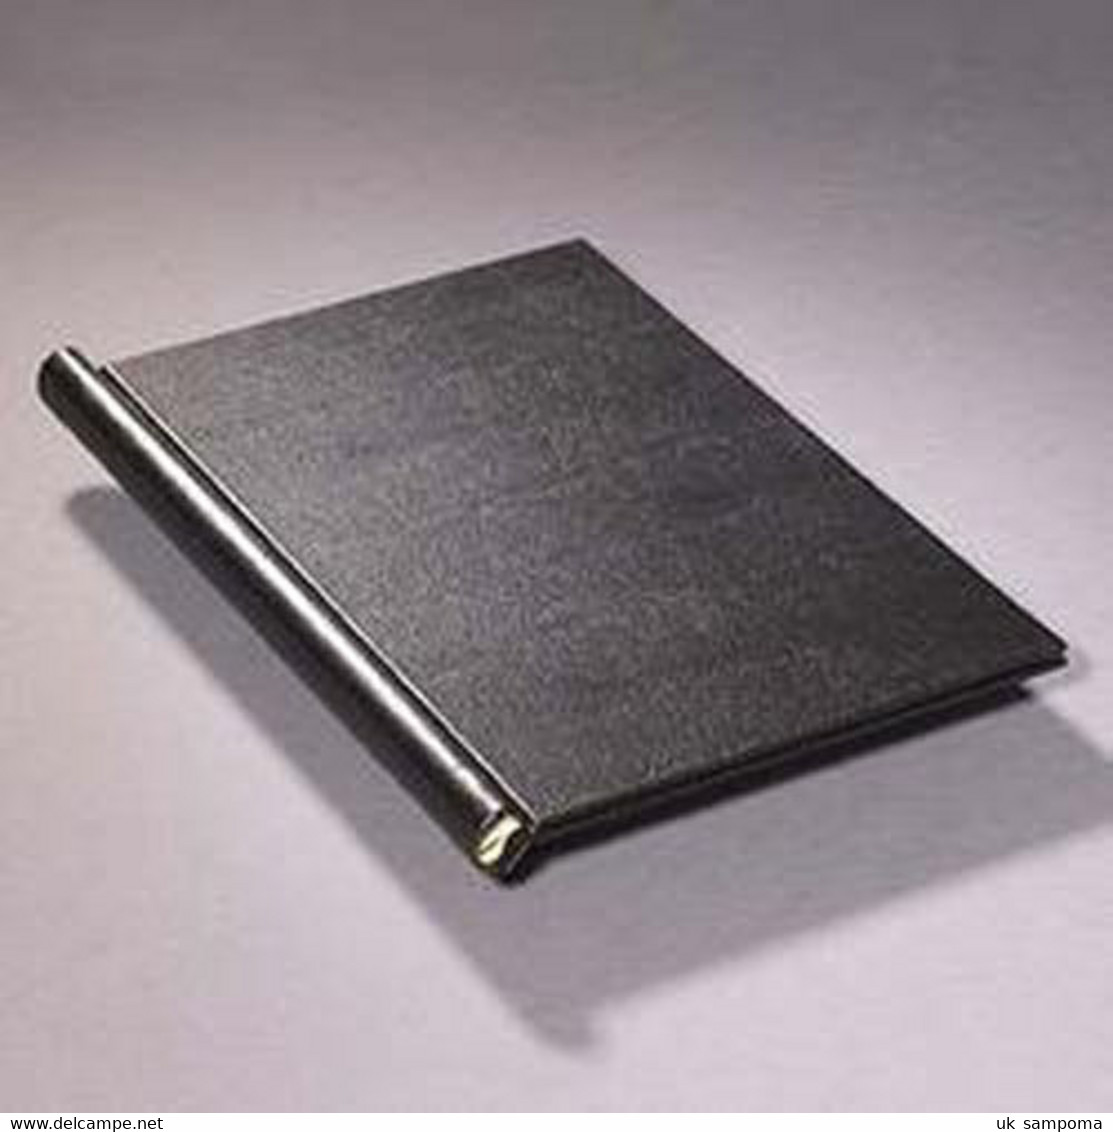 Springback Binder PEKA A4, Capacity: 150 Pages Maximum, Size: 305x220x25 Mm, Black - Large Format, Black Pages